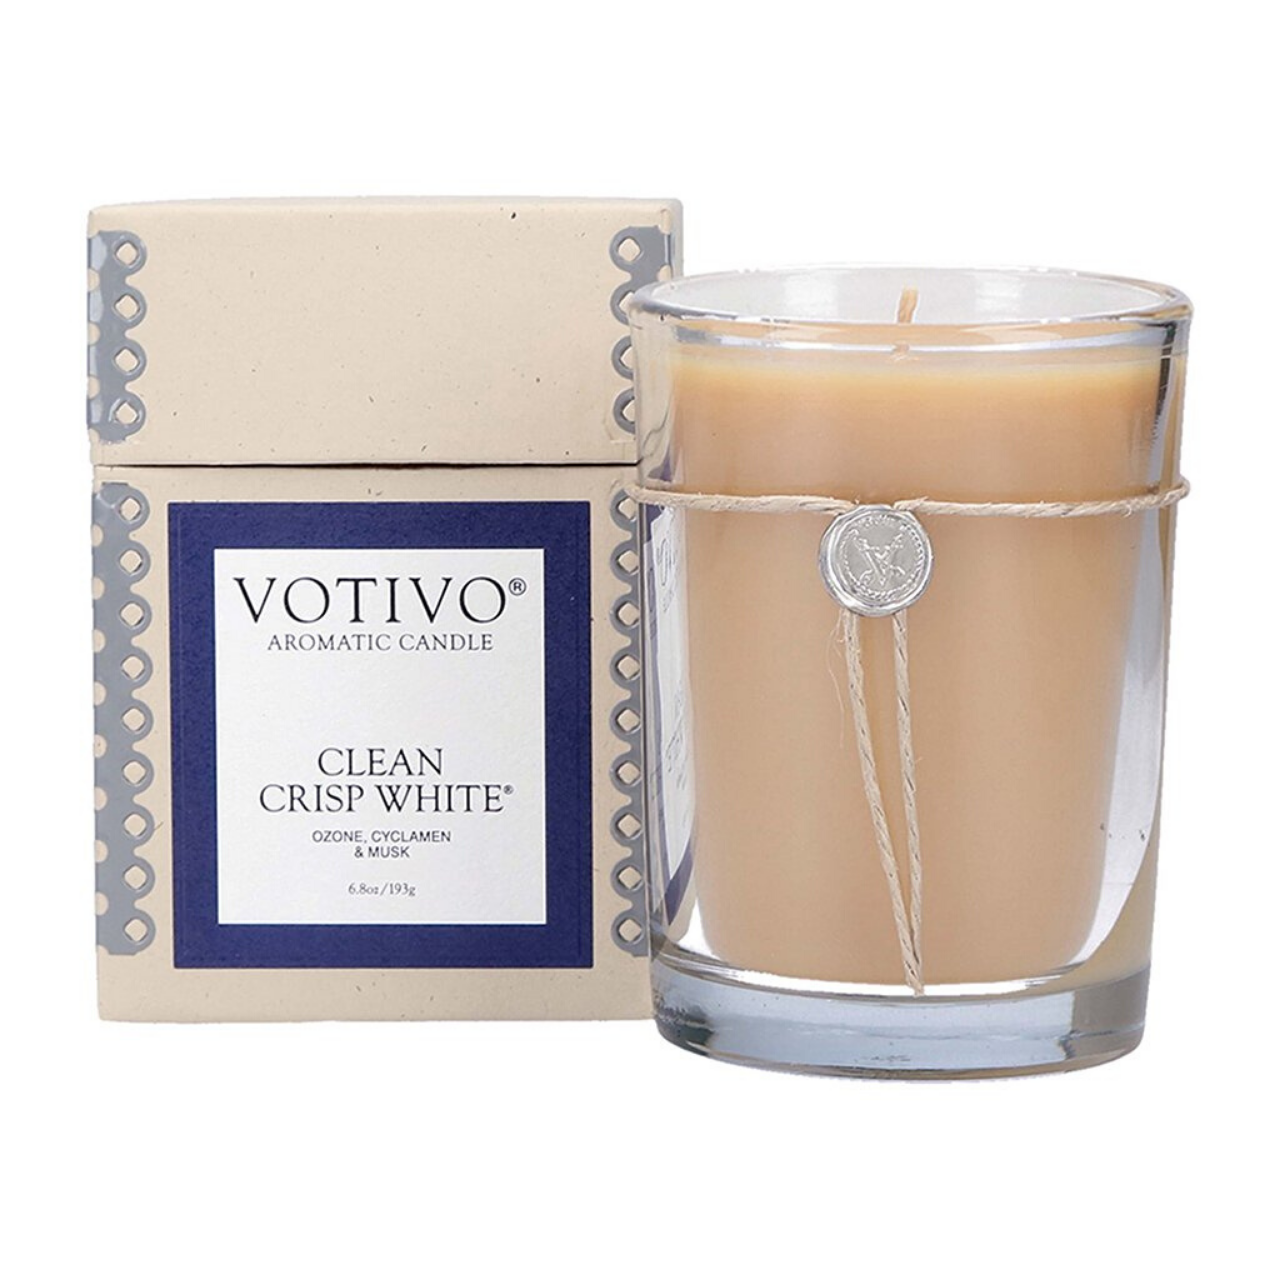 Clean Crisp White Aromatic Candle